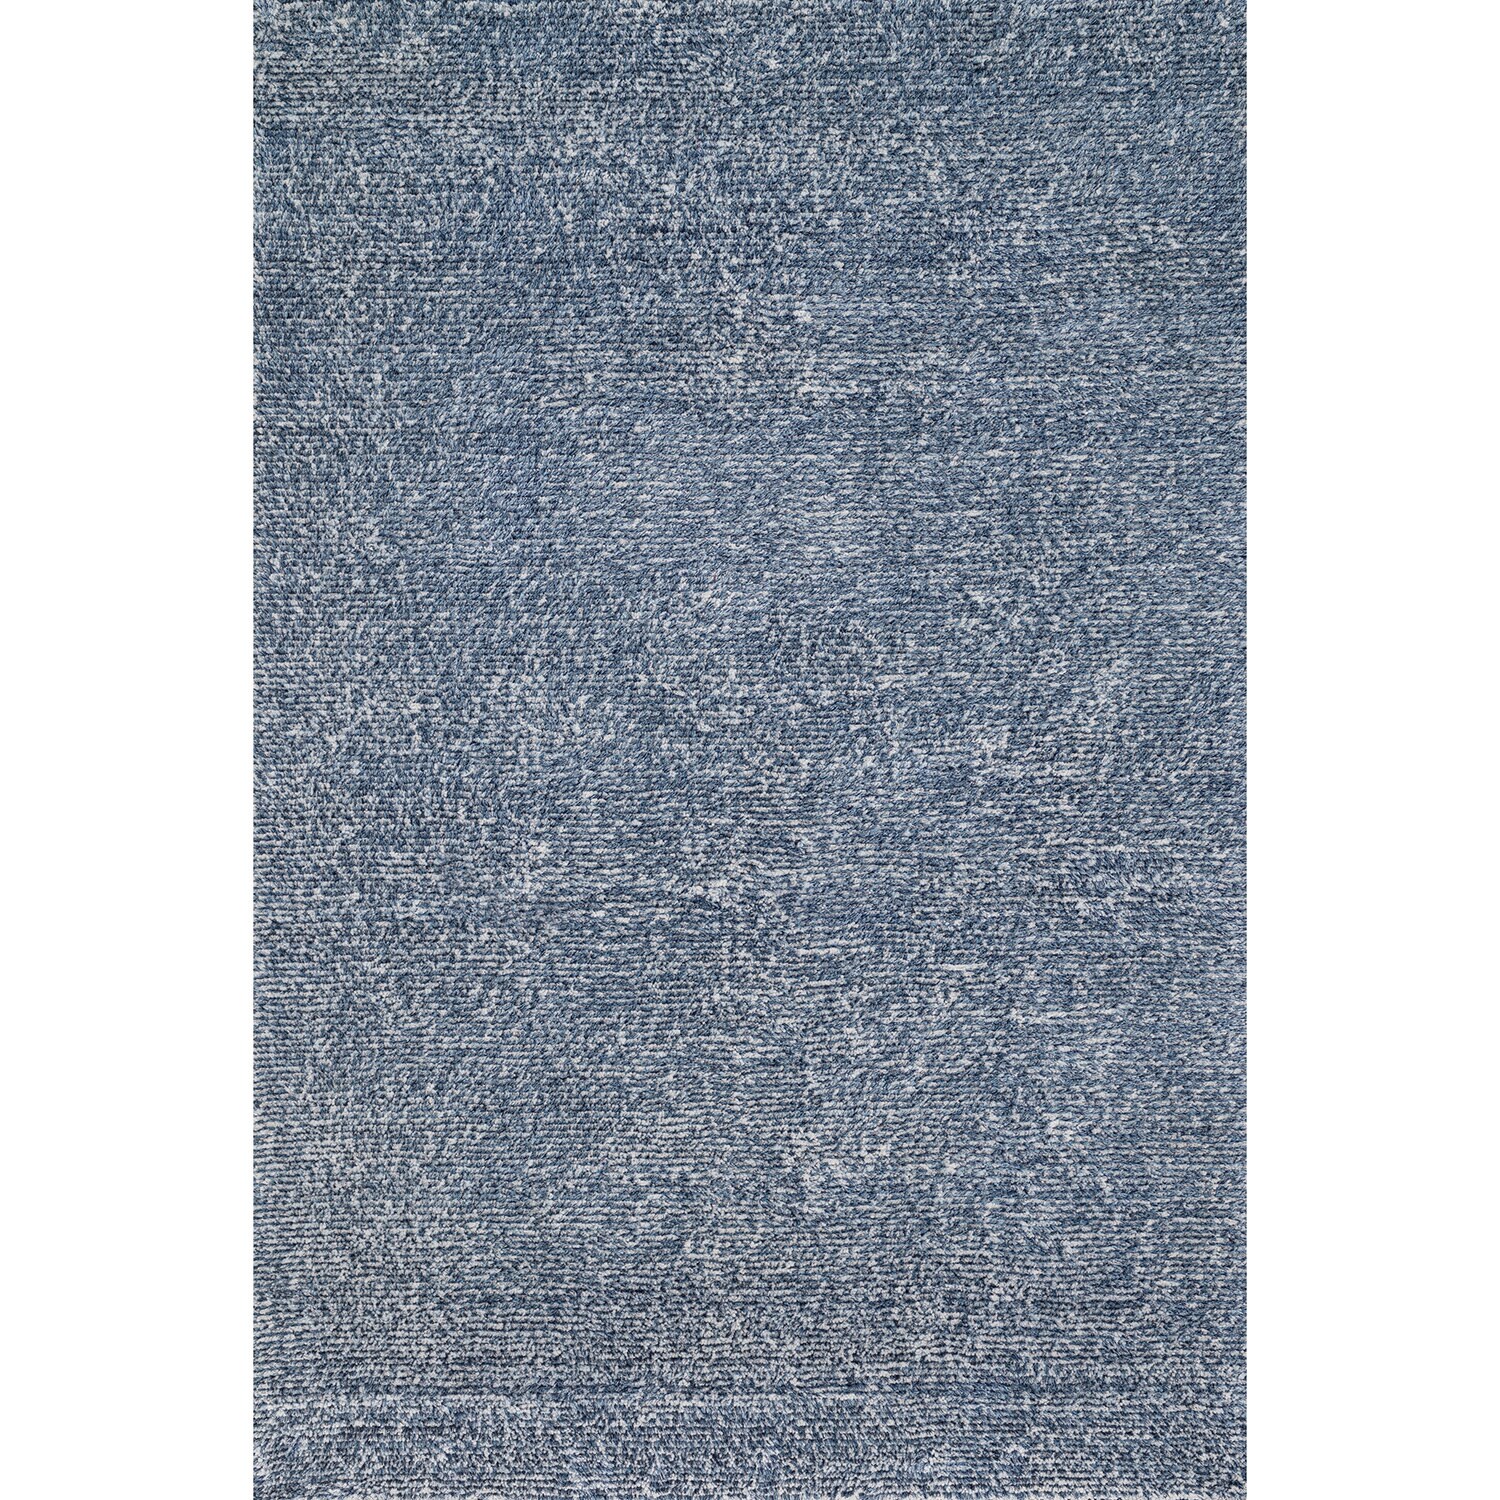 Solid, Blue Area Rugs Buy 7x9   10x14 Rugs, 5x8   6x9